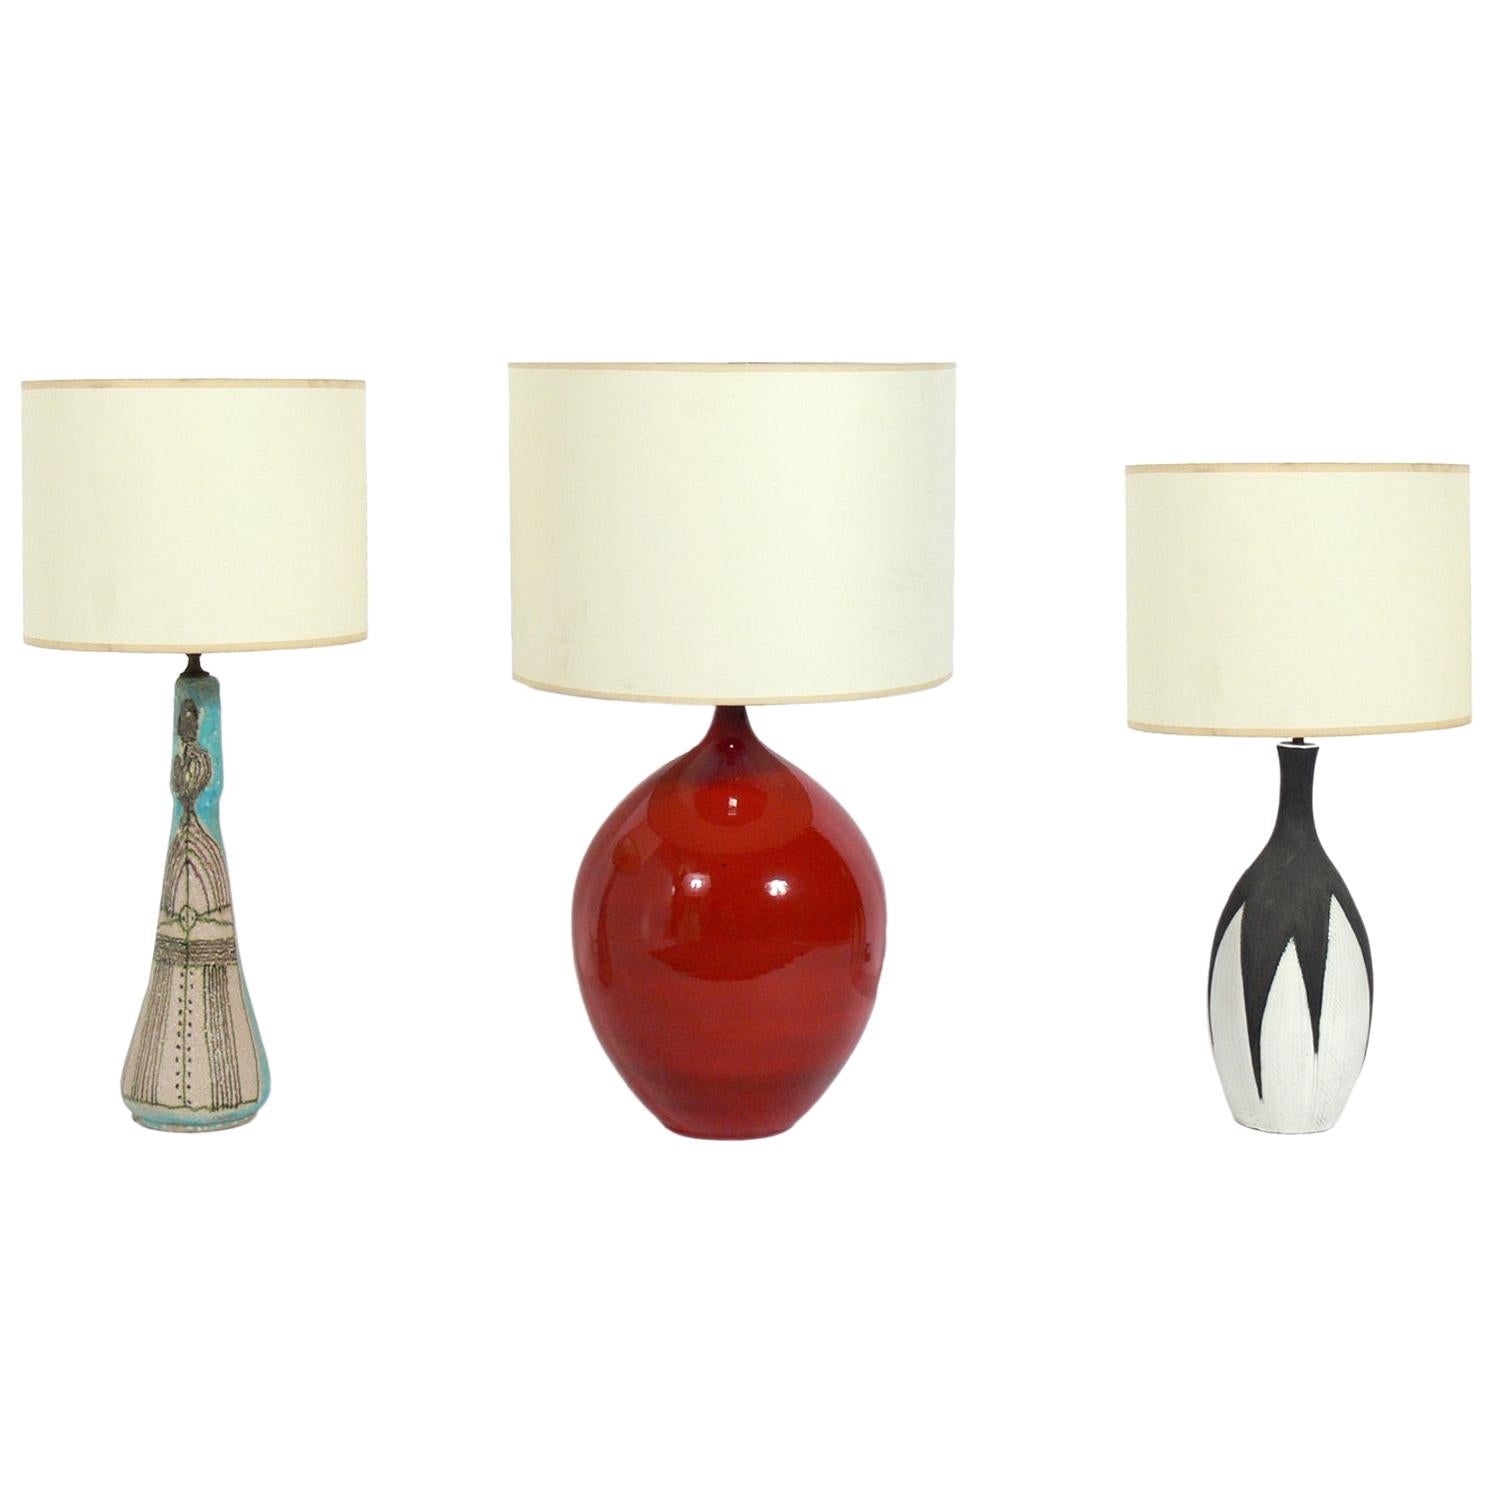 Selection of Modernist Ceramic Lamps